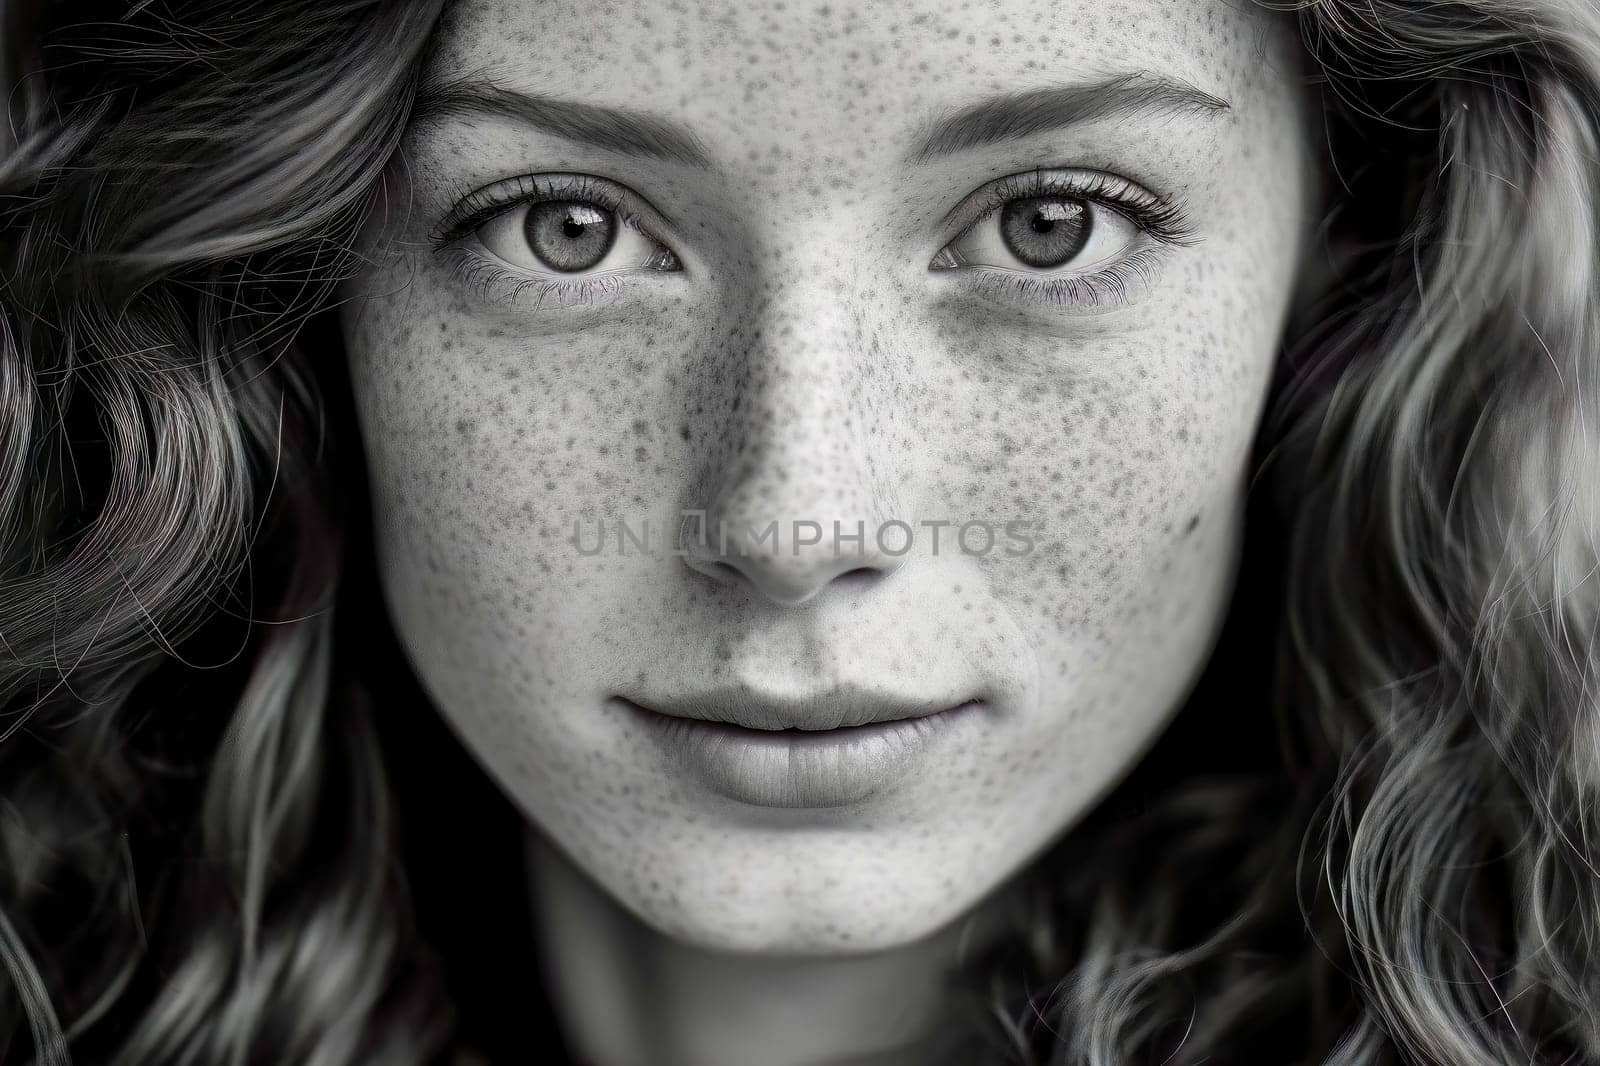 Sweet Freckled Beauty: Close-up Black and White Portrait of a Girl by pippocarlot